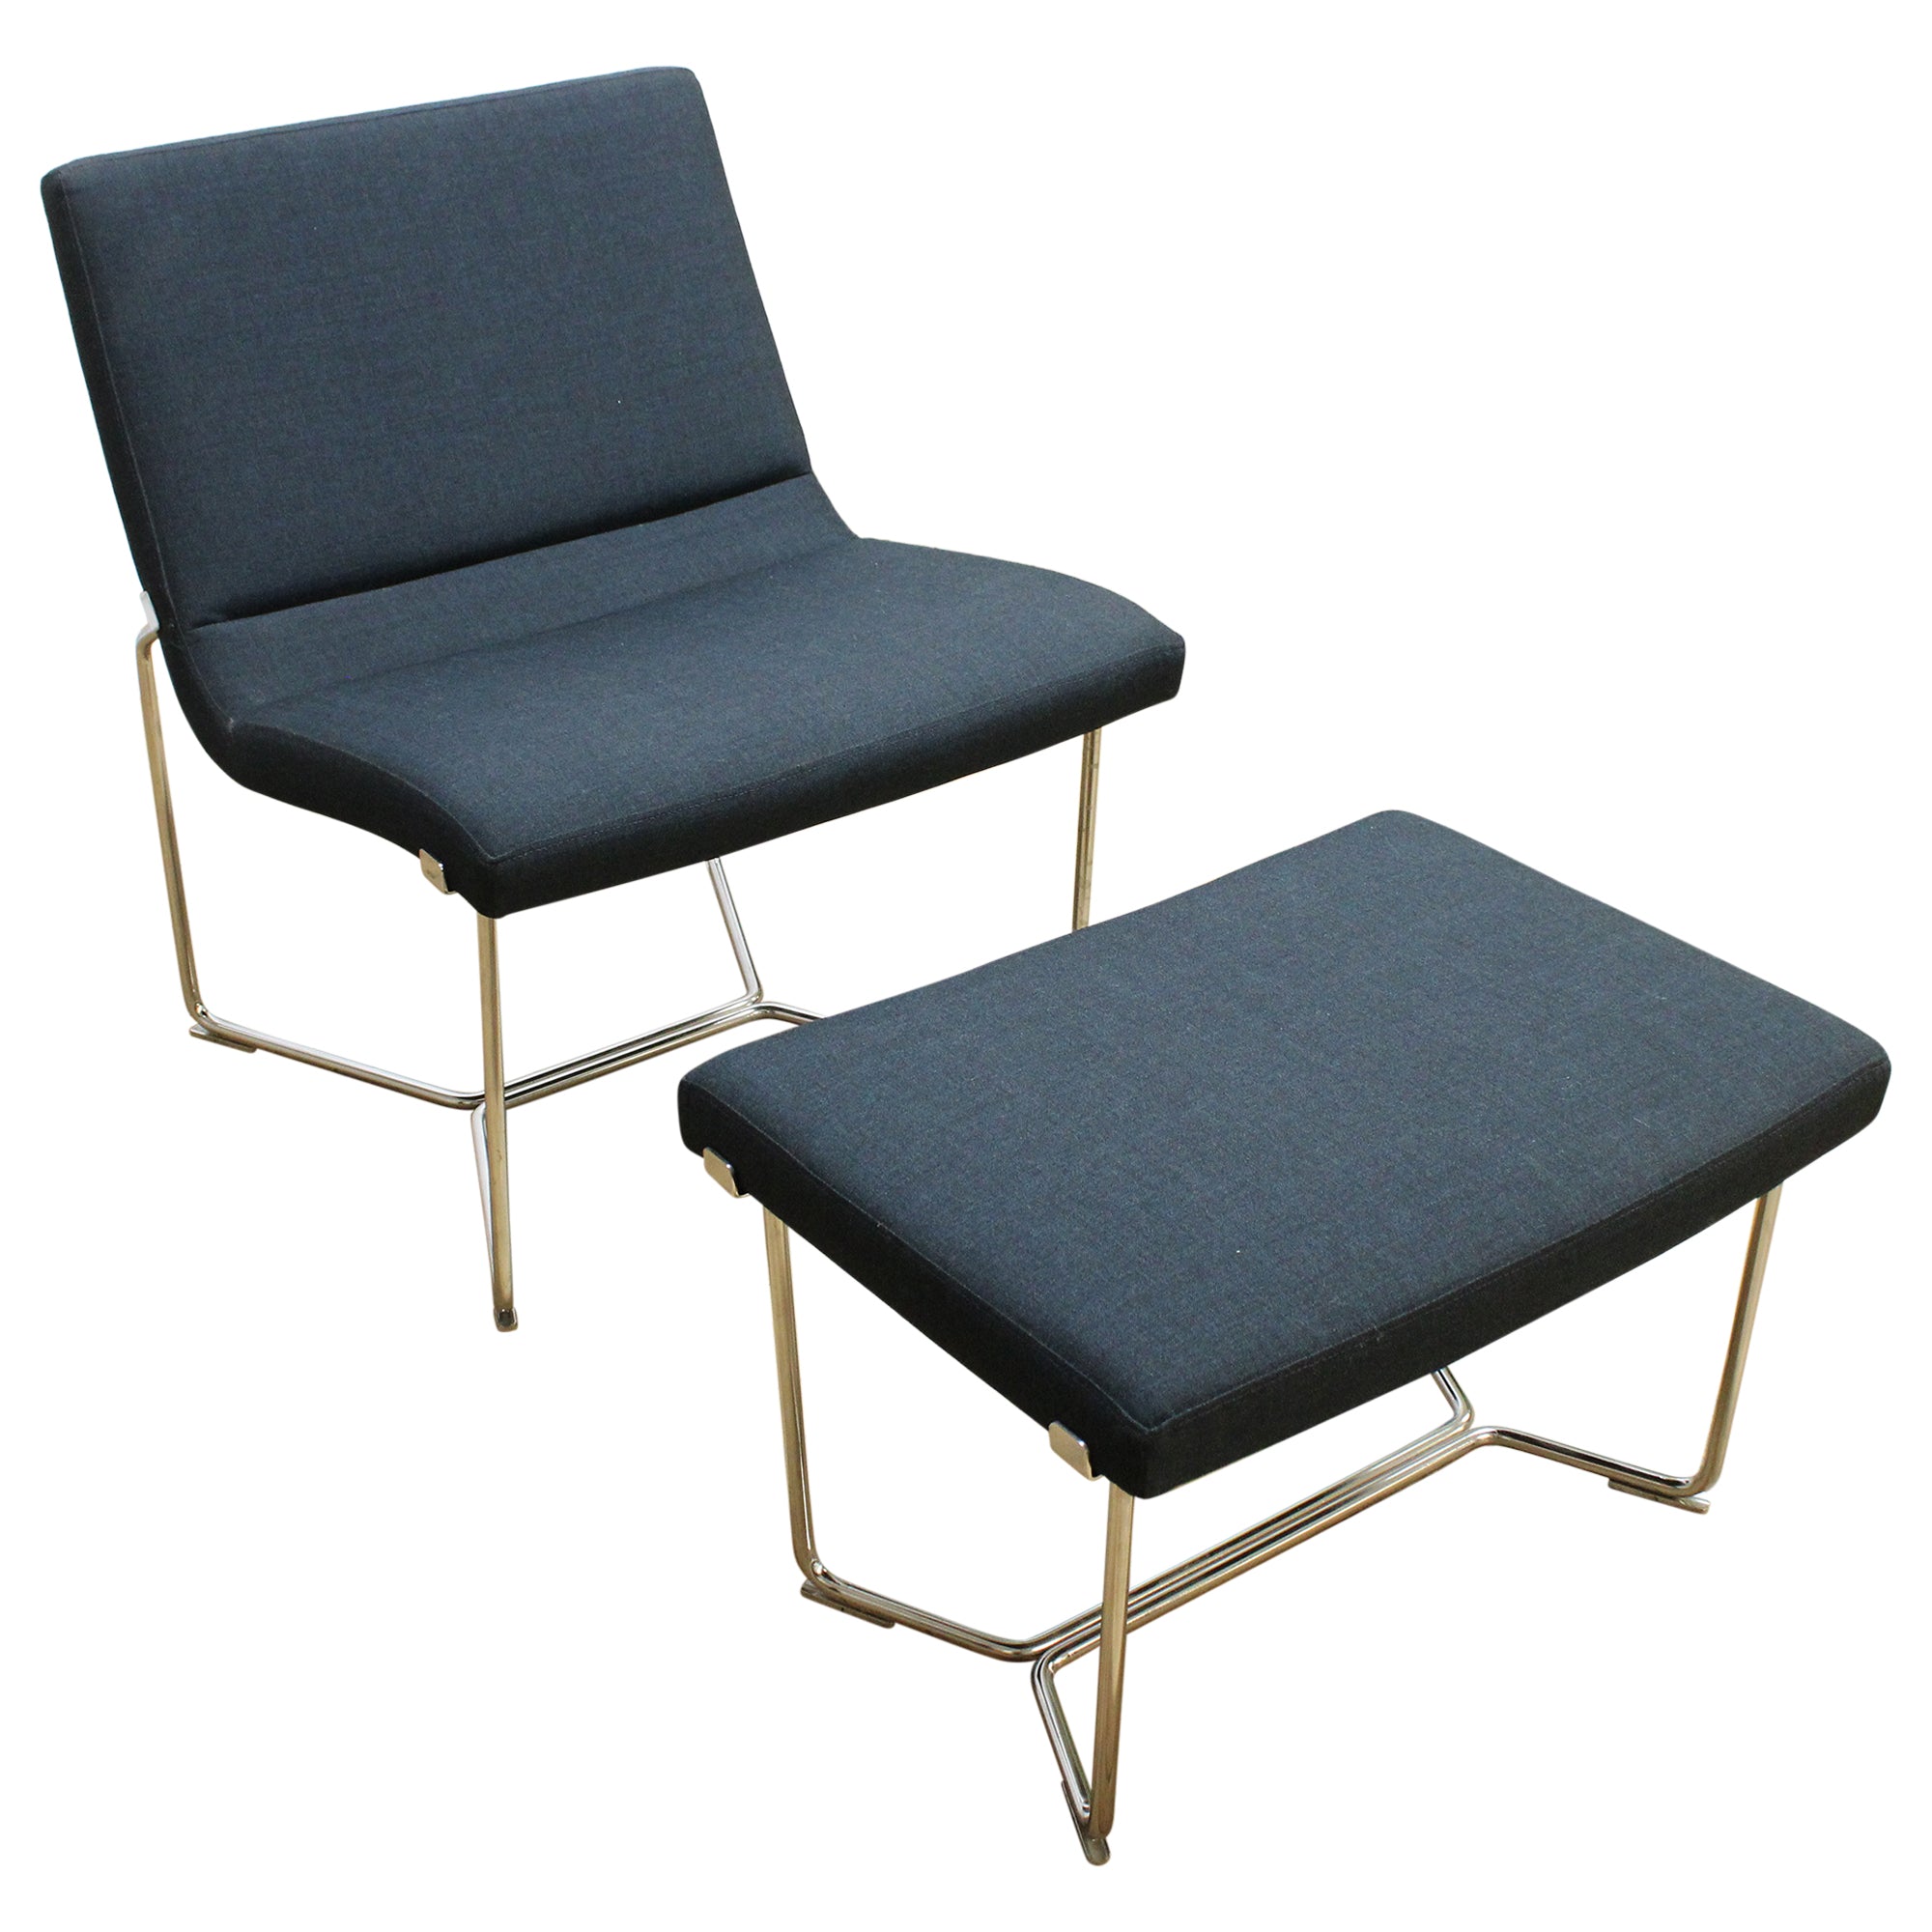 Harter Forum Seat Lounge Chair w/ Ottoman – Navy -Preowned